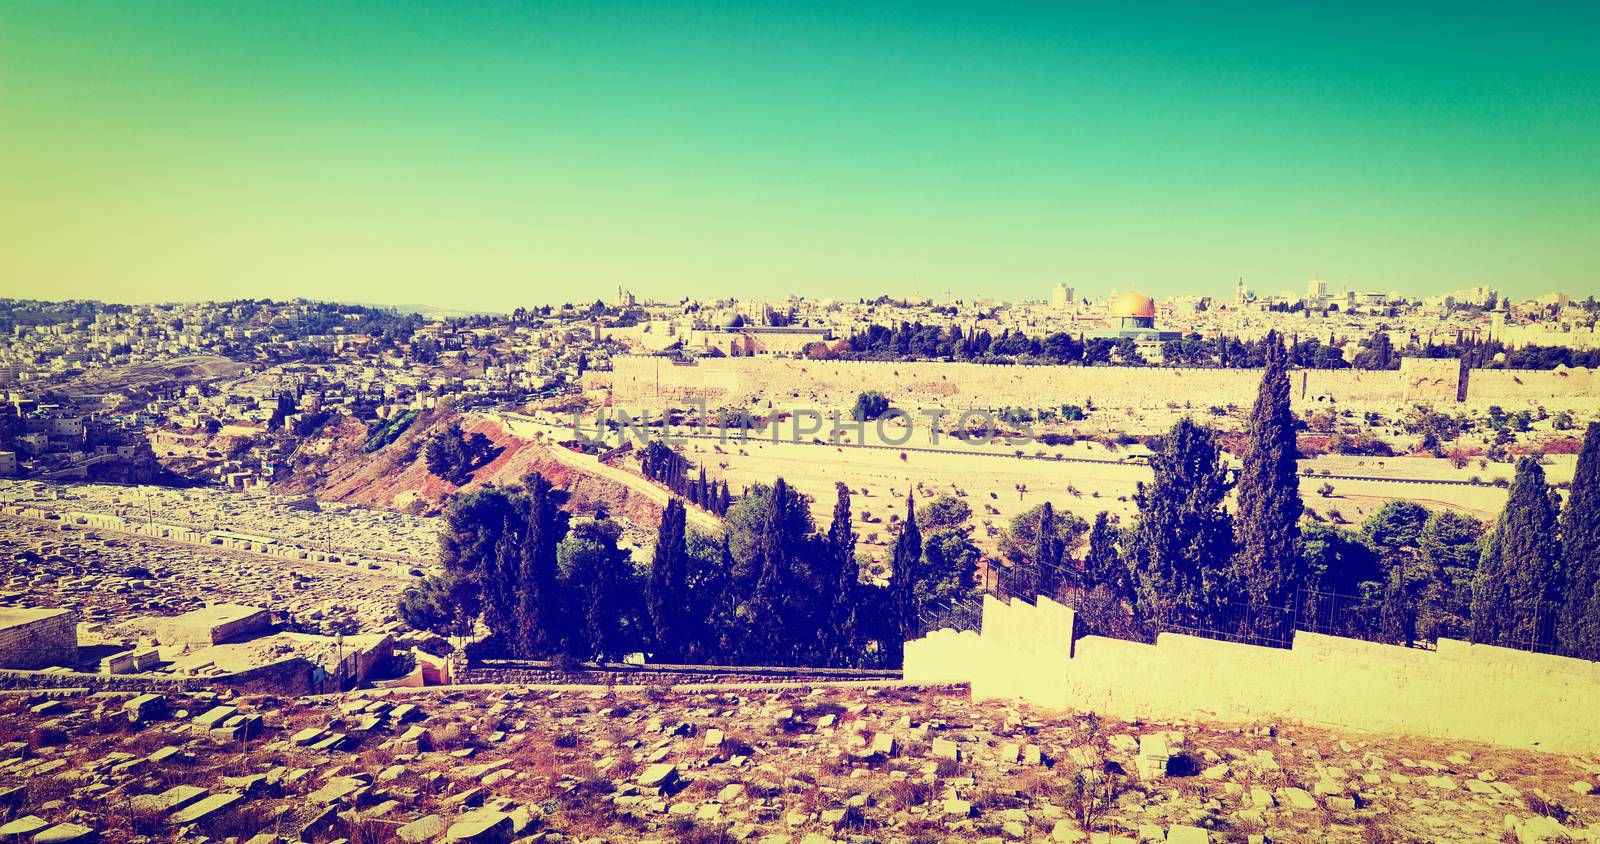 View to Walls of the Old City of Jerusalem, Instagram Effect